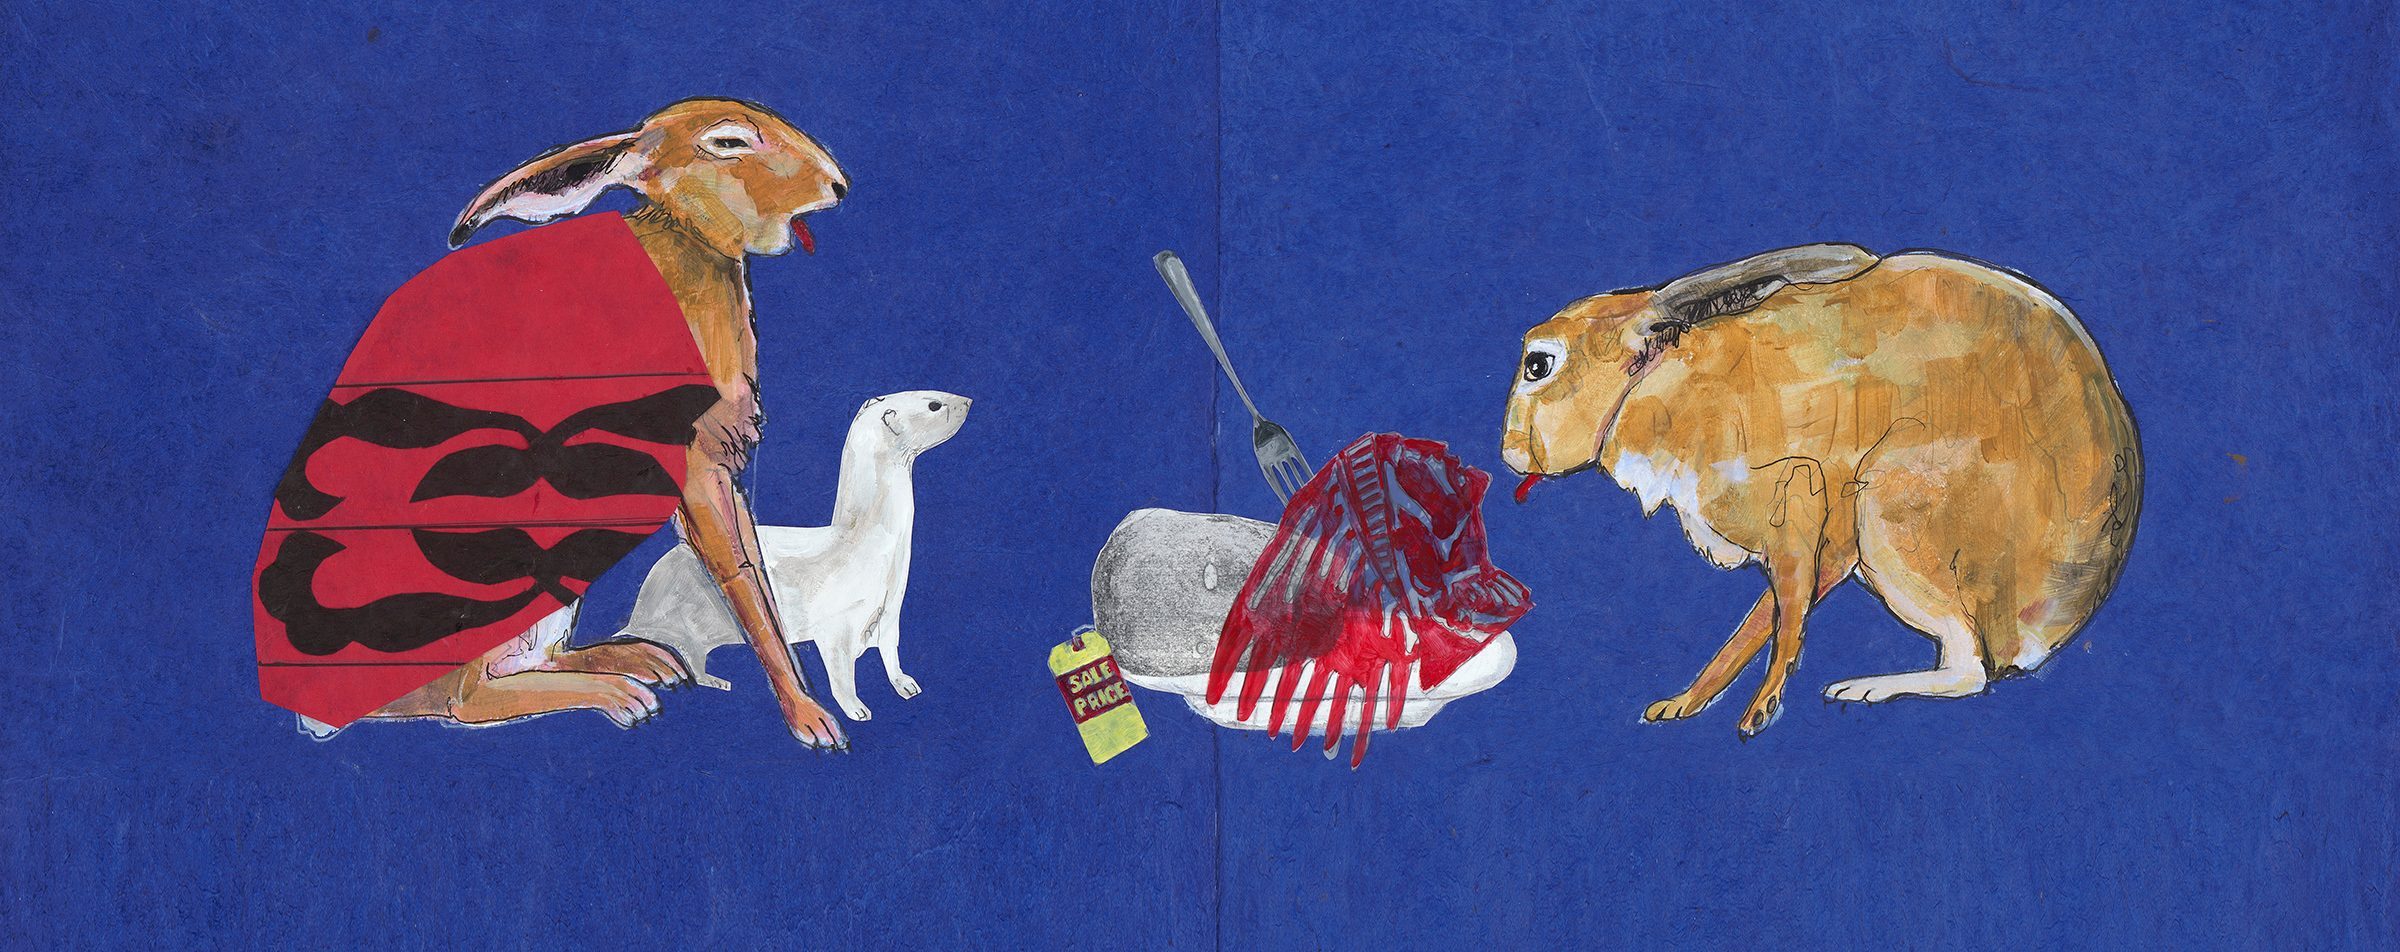 Painting of two rabbits and an ermine about to eat some unidentifiable food with a "sale price" tag on it